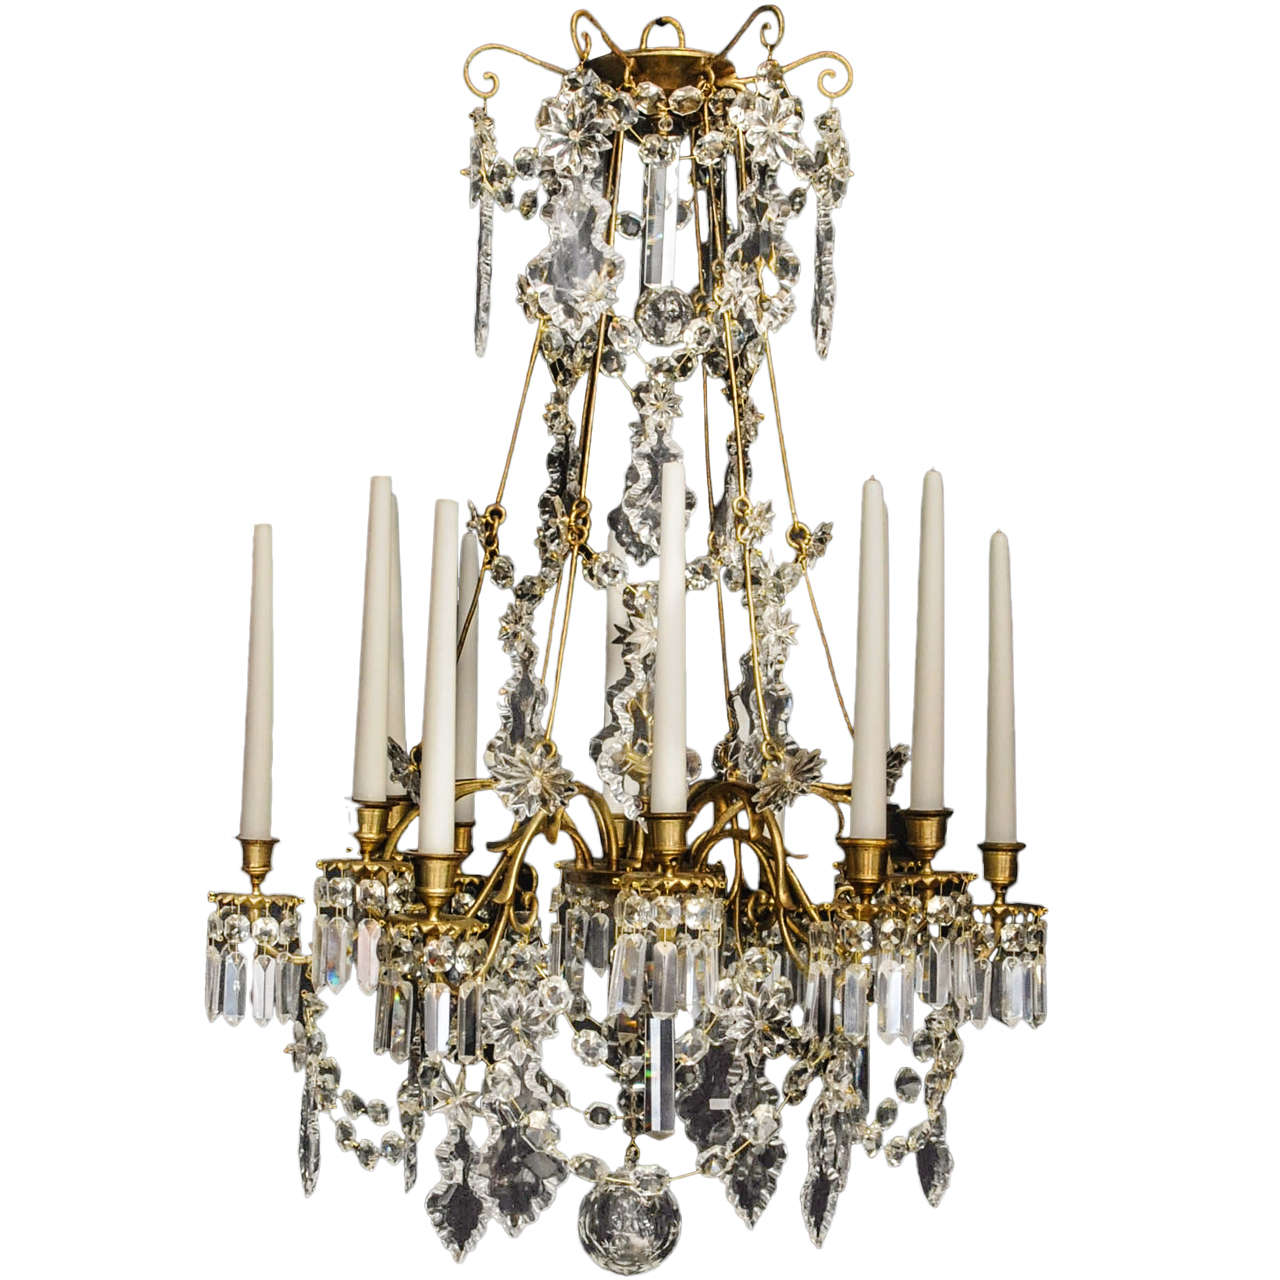 A 19th C. French Bronze And Glass 12 Light Chandelier For Sale